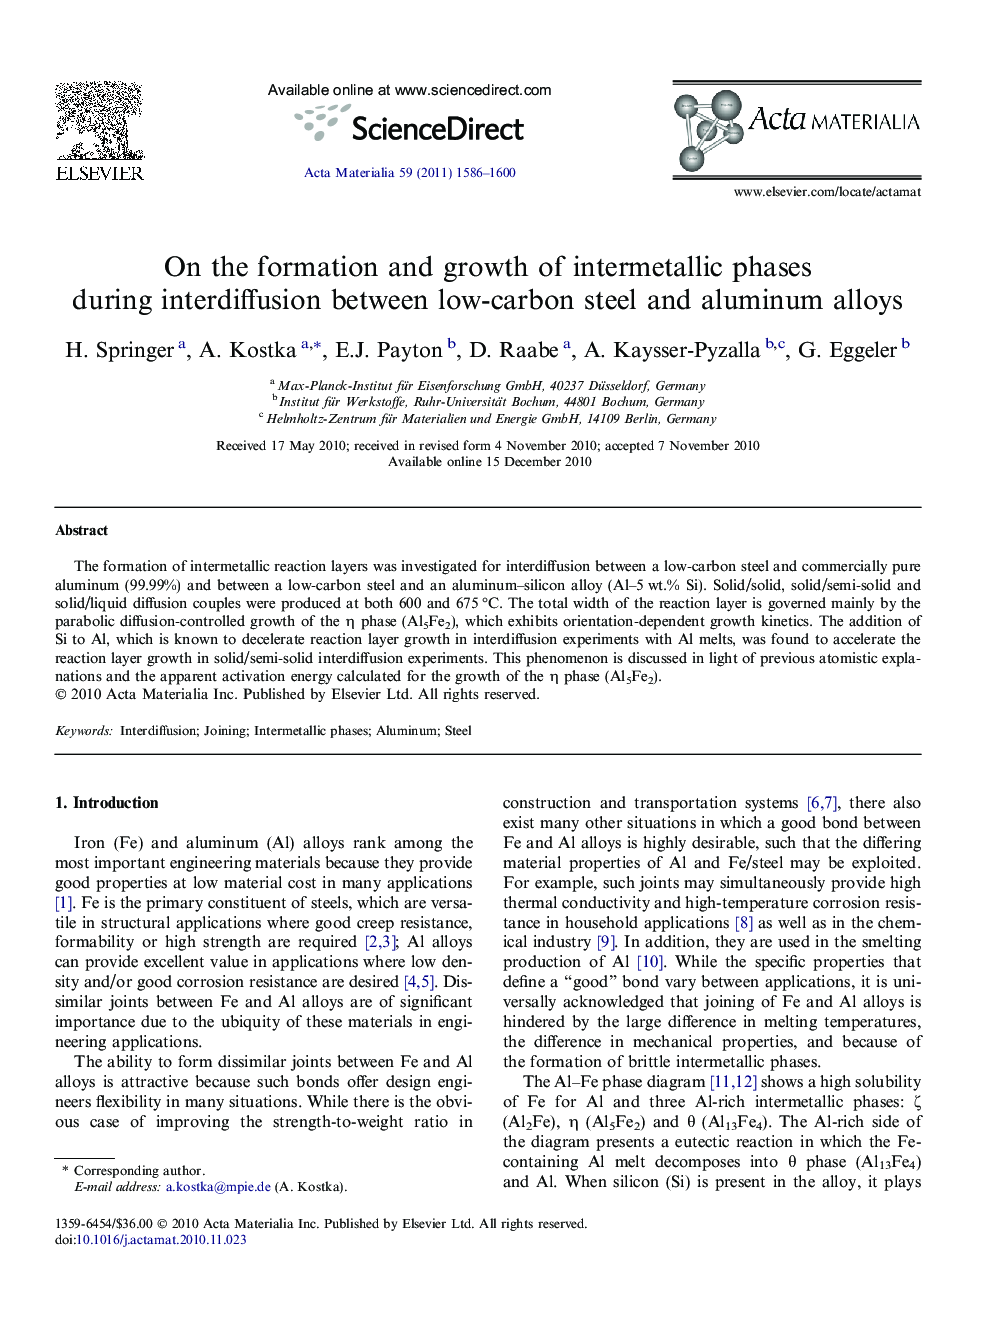 On the formation and growth of intermetallic phases during interdiffusion between low-carbon steel and aluminum alloys